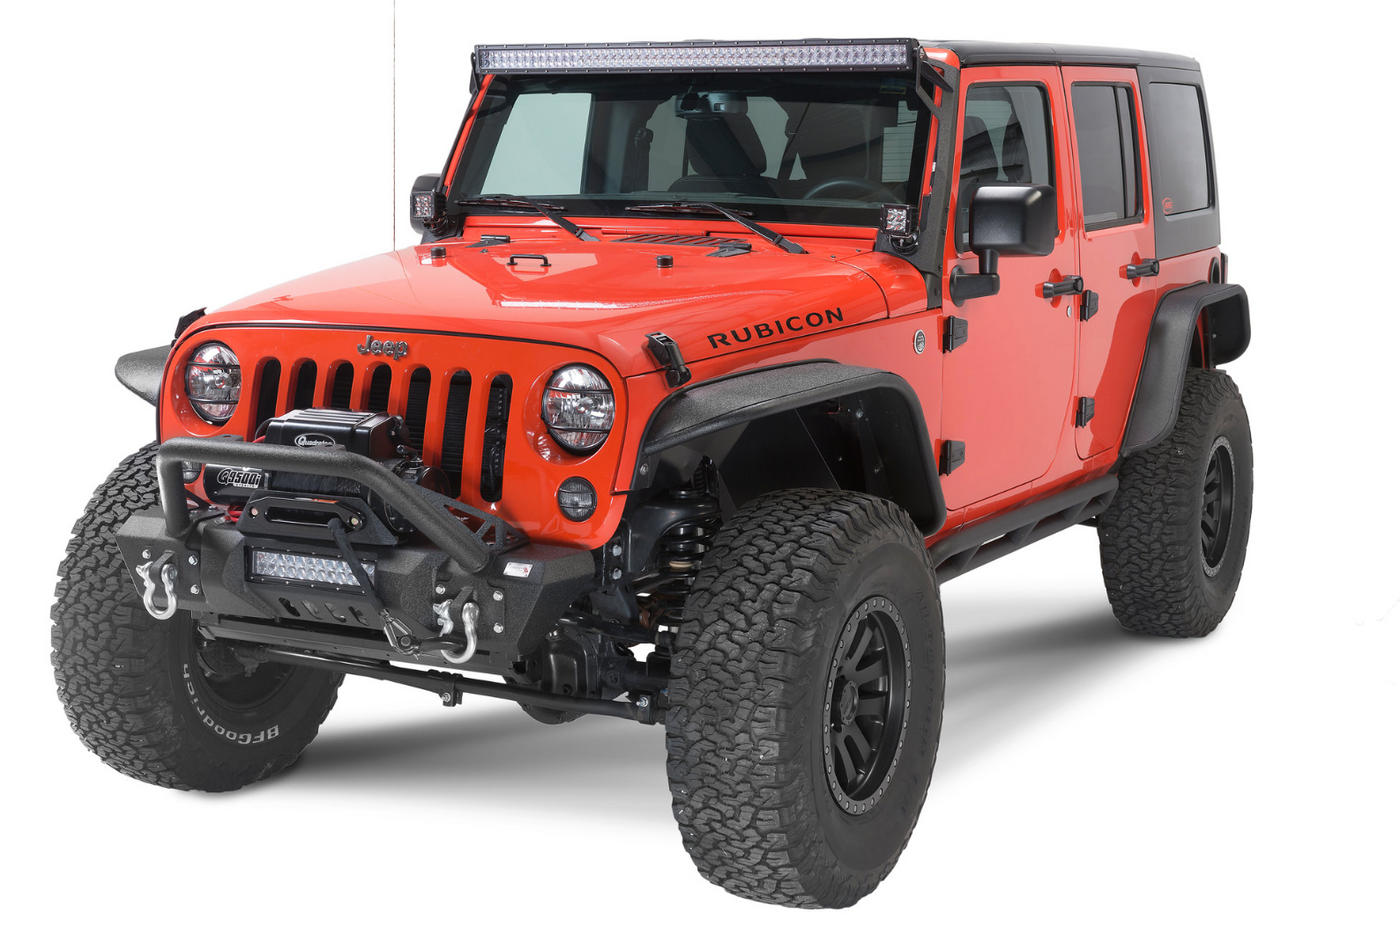 Fishbone Offroad Front Stubby Winch Bumper with Tube Guard for 07-18 Jeep Wrangler JK